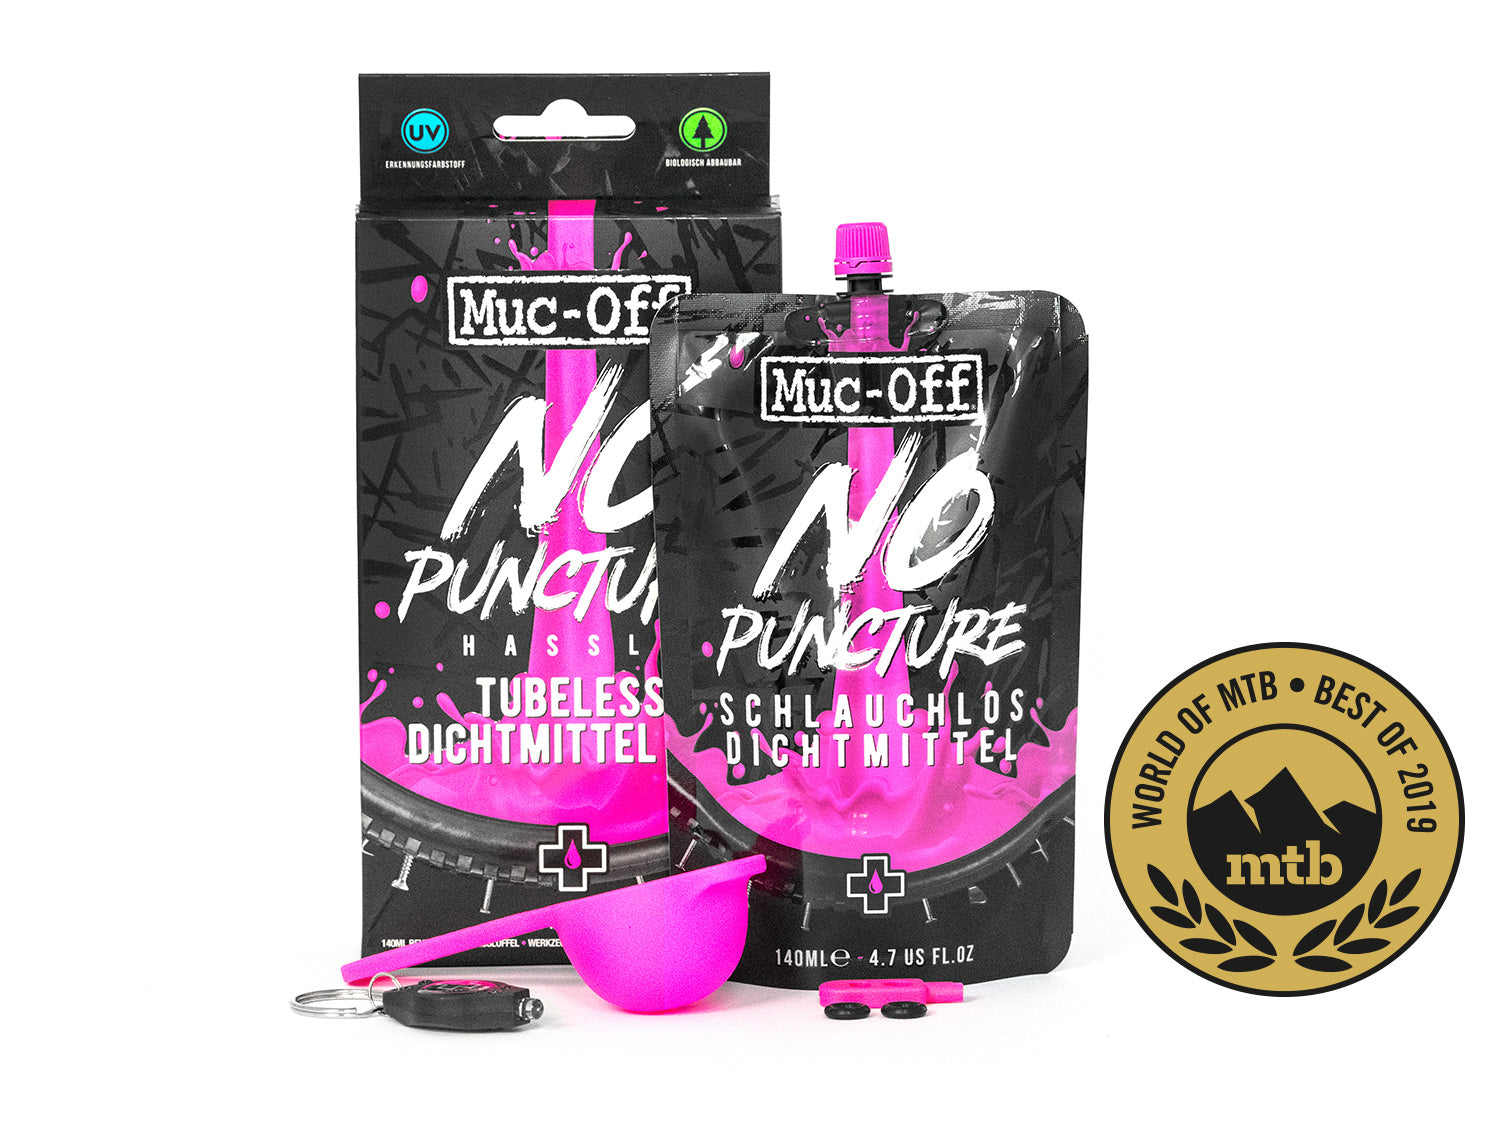 Muc-Off No Puncture Hassle 140ml - Dichtmilch